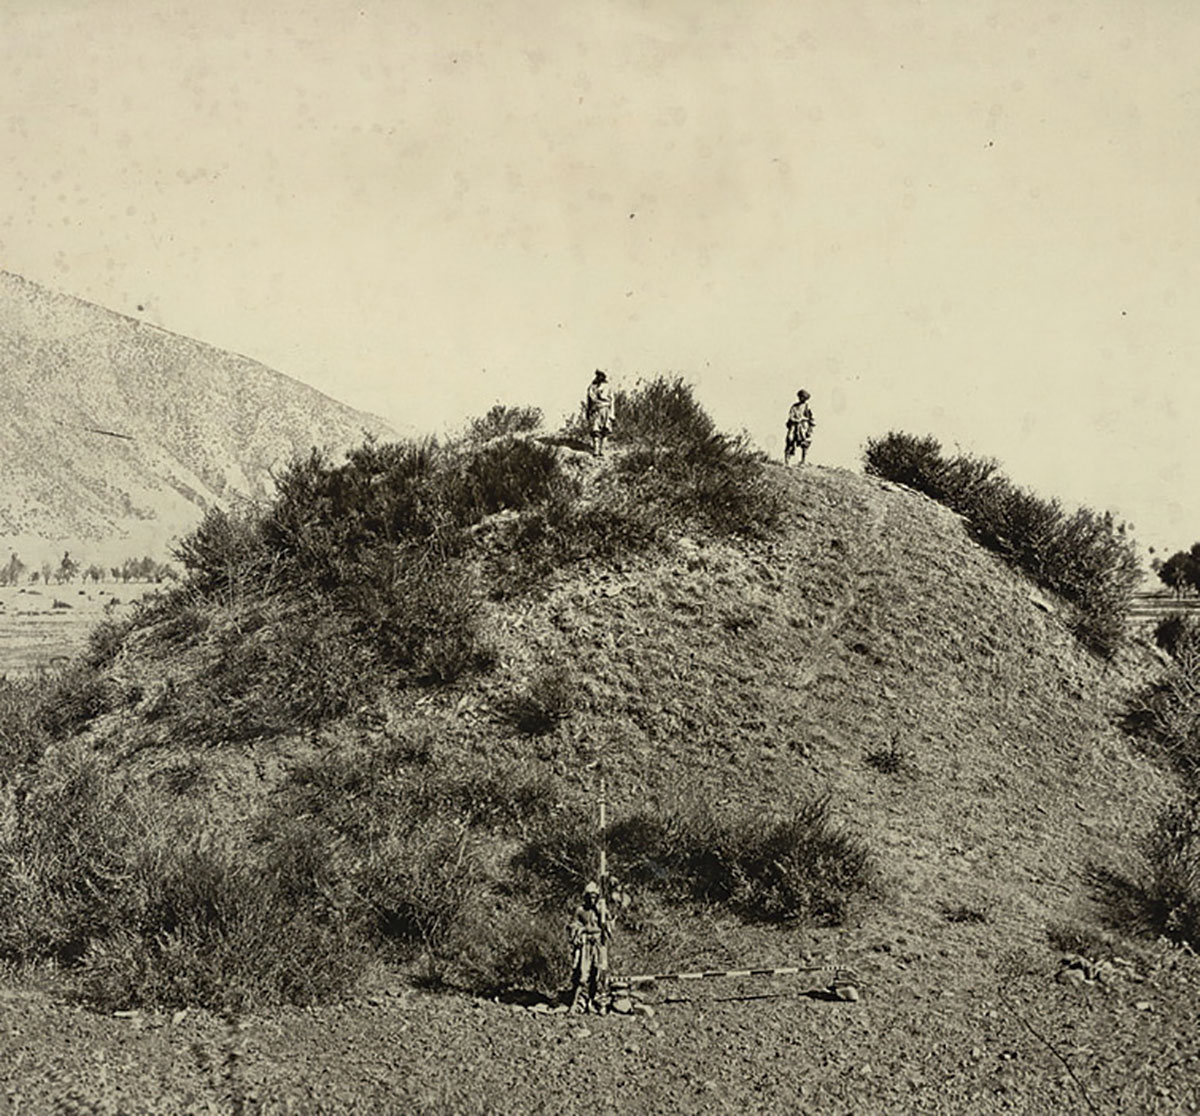 Photograph of a Buddhist stupa mound near Baramulla in Jammu and Kashmir, taken by John Burke in 1868. Buddhism was established in Kashmir from the third century BC but declined by the 8th century AD, eclipsed by Hindu Vaishnavism and Shaivism. Two of the most important sites for Buddhist remains in the Kashmir valley are Harwan near Srinagar and Ushkur near Baramulla.